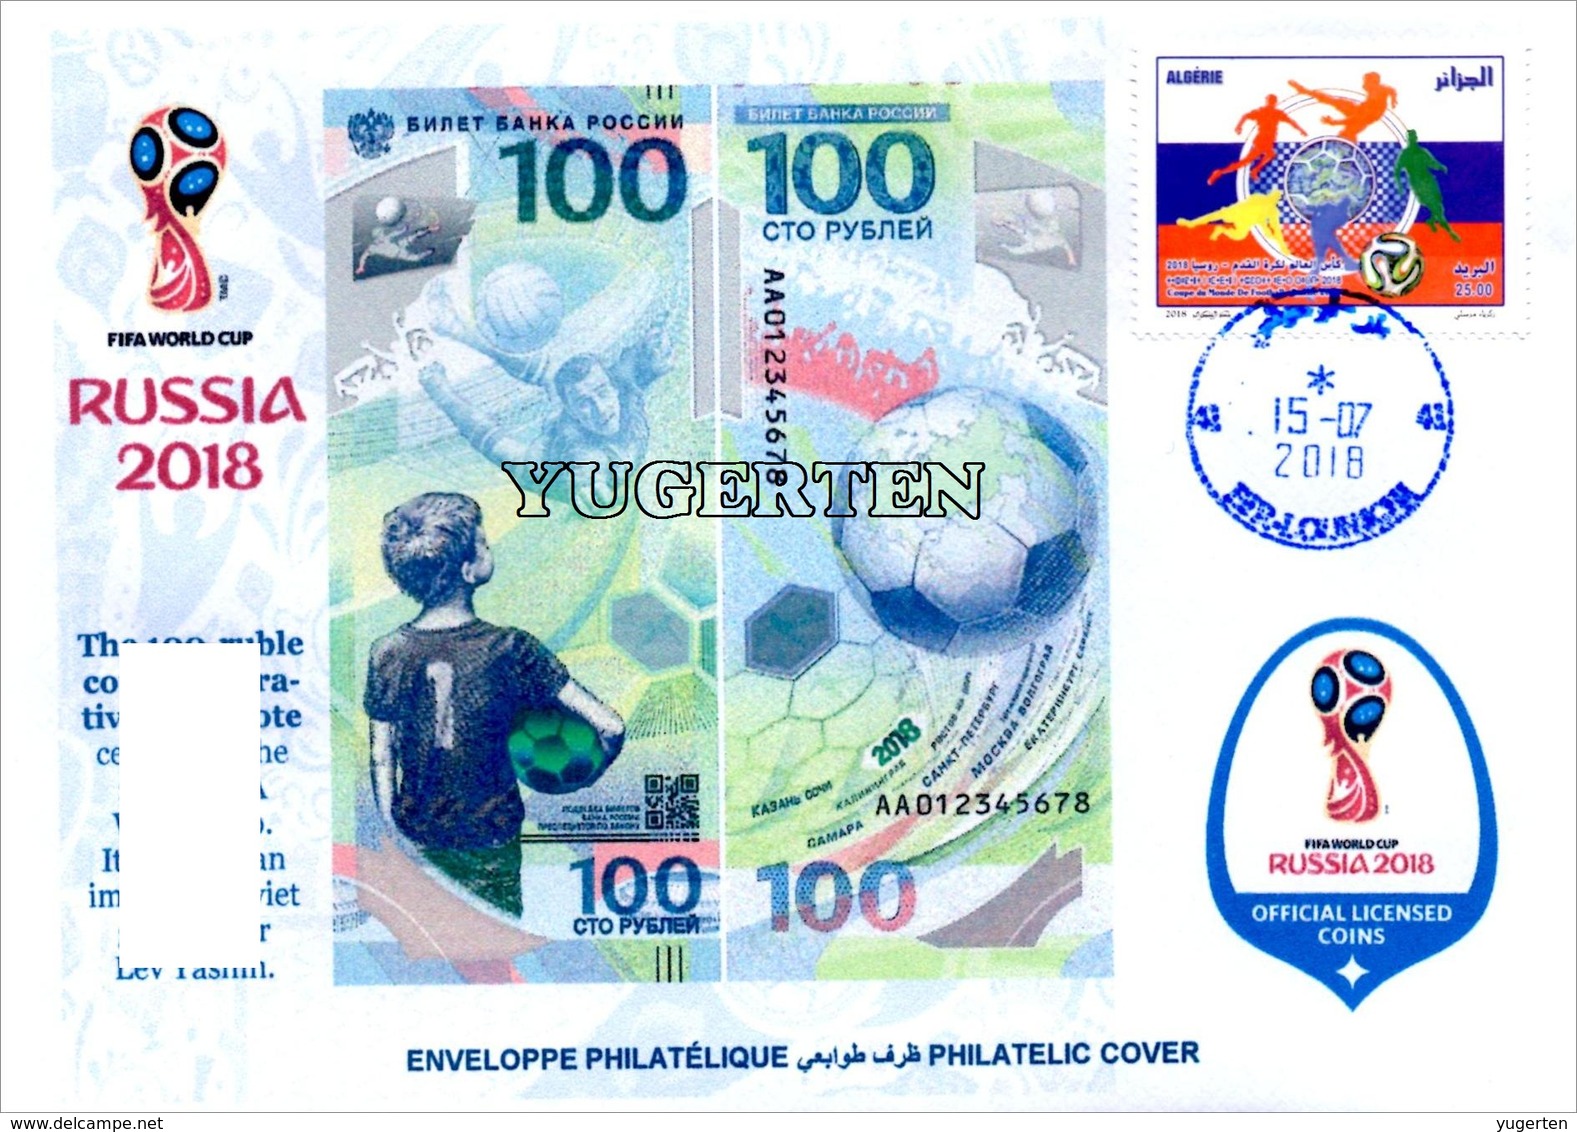 ARGHELIA - Philatelic Cover Coins Banknotes Currencies Money FIFA Football World Cup Russia 2018 Geld Münzen Yashin - 2018 – Rusia